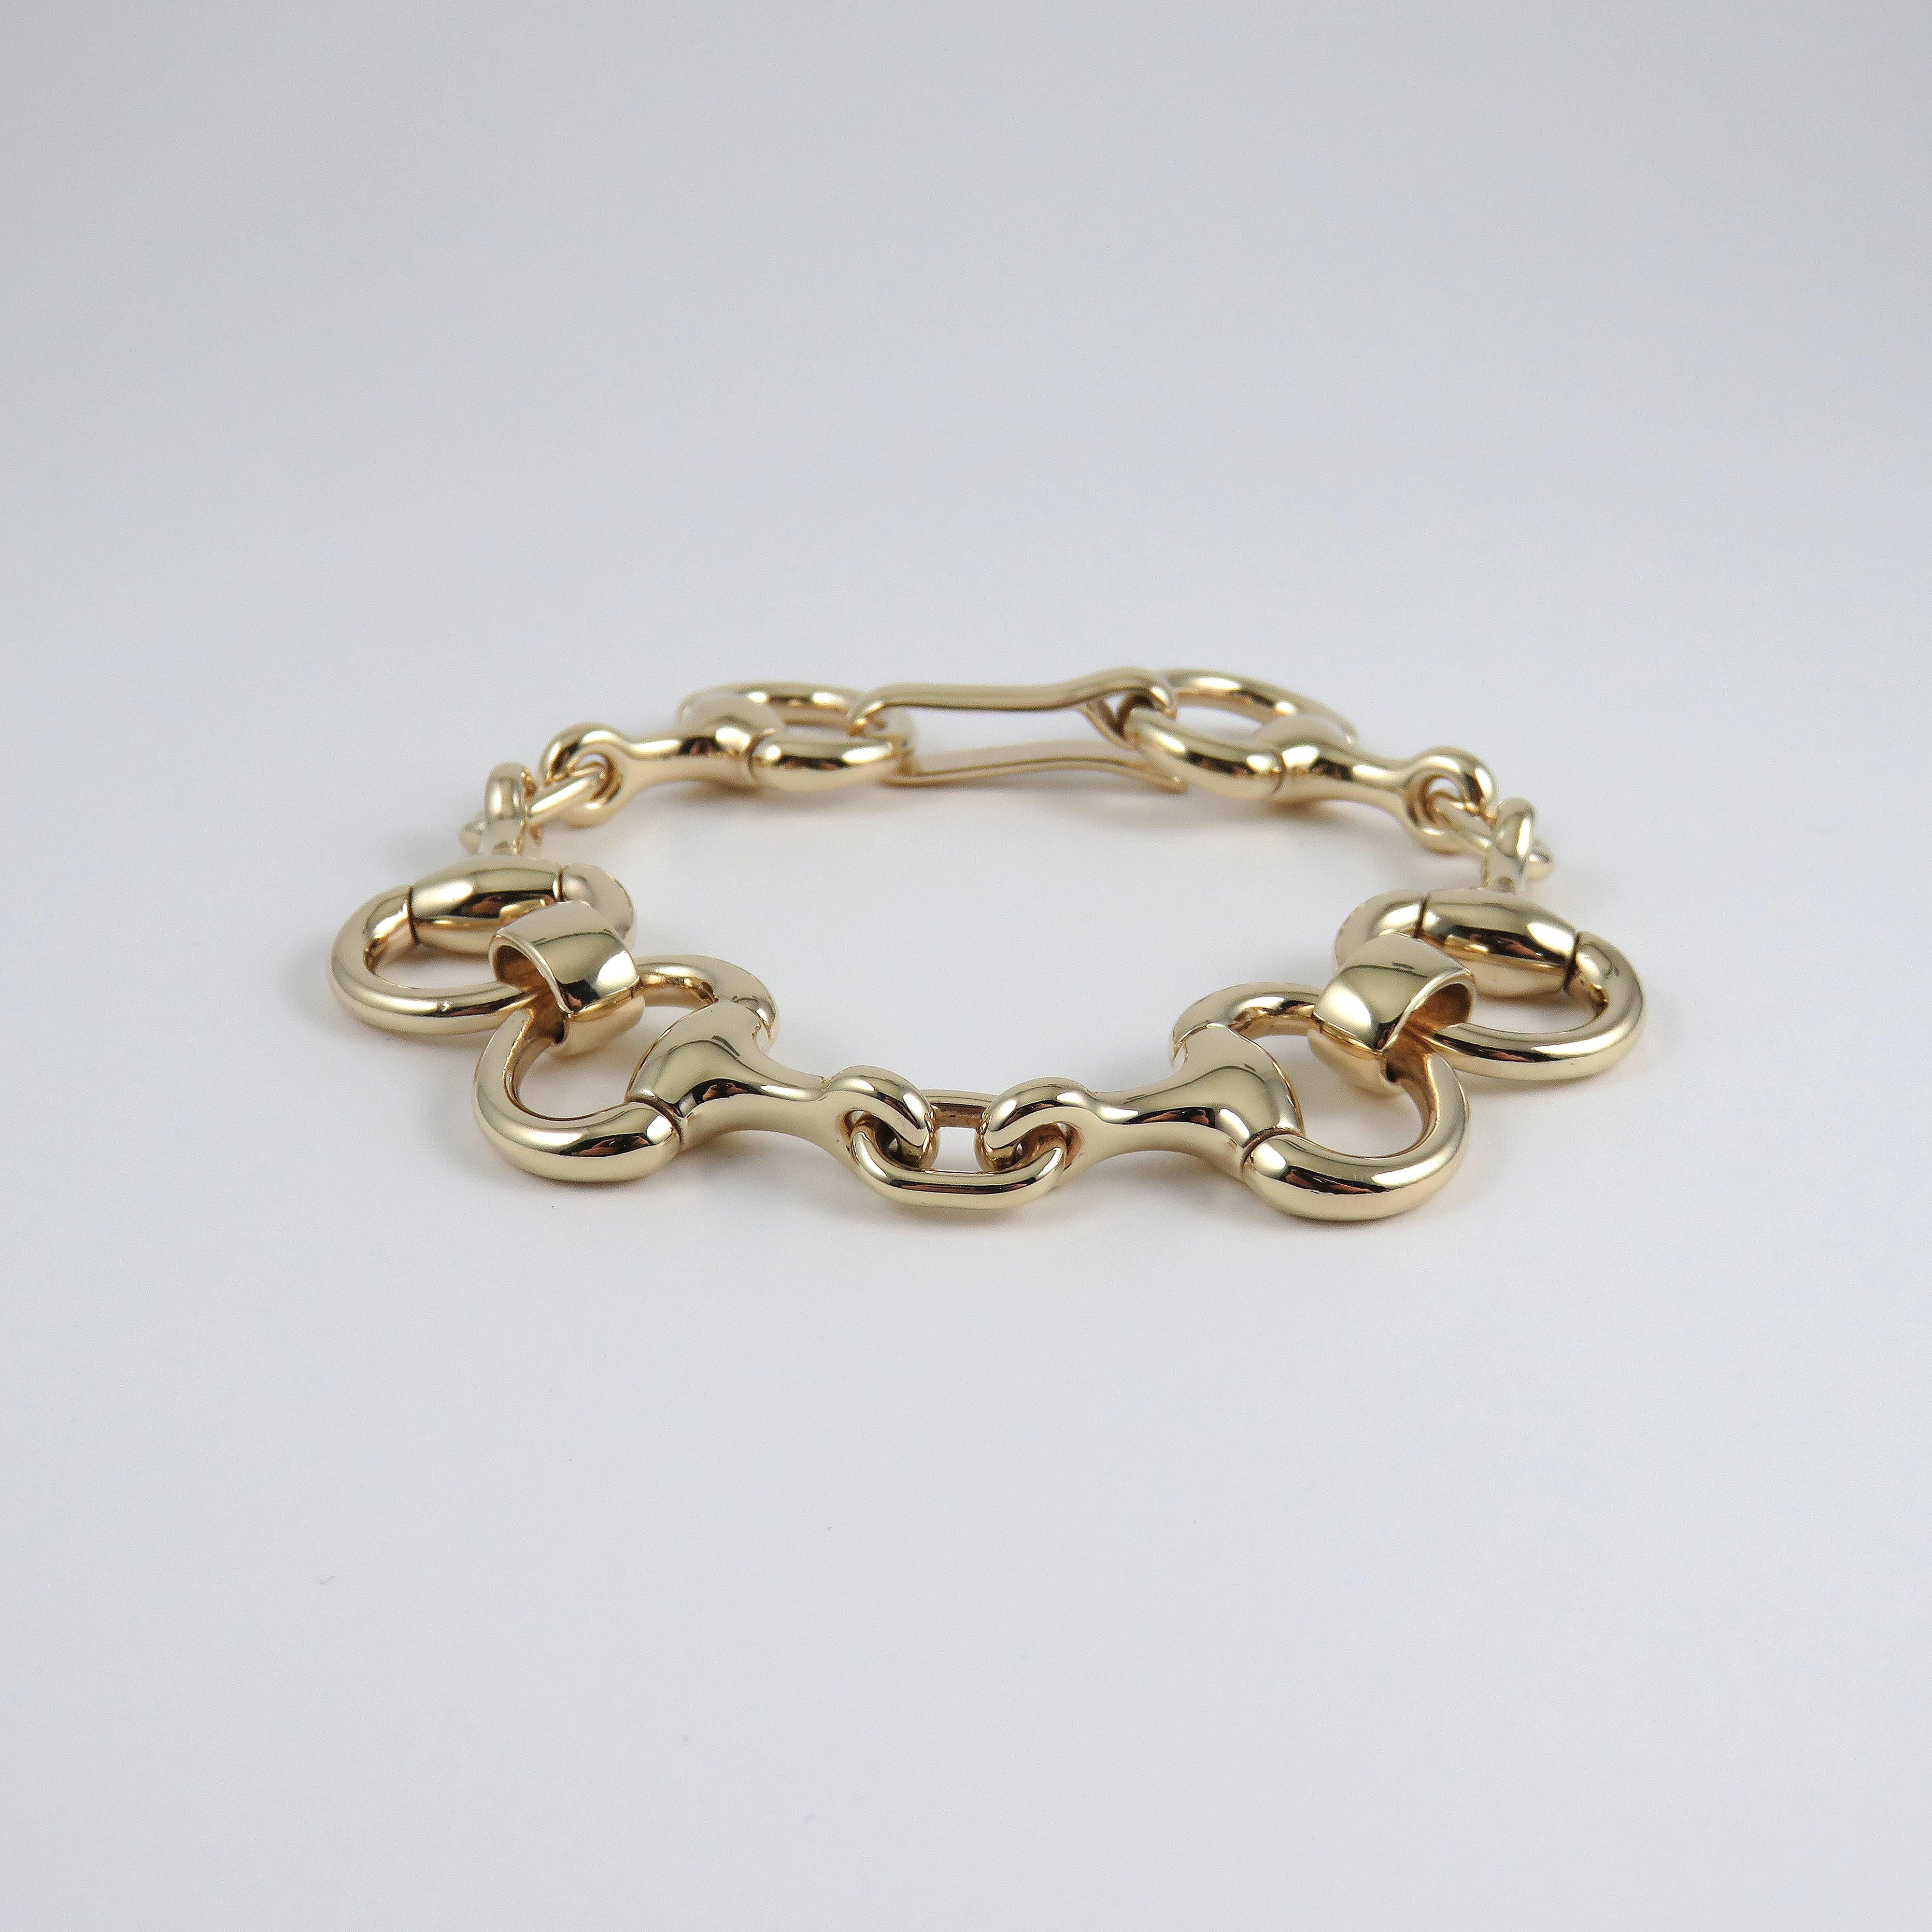 The love of your job, hobby or ranch life in general, this bracelet epitomises true elegance, as well as being tough and durable giving you the best of both worlds.

Equestrian jewellery at it's finest, crafted in 9ct yellow gold.  Combing three